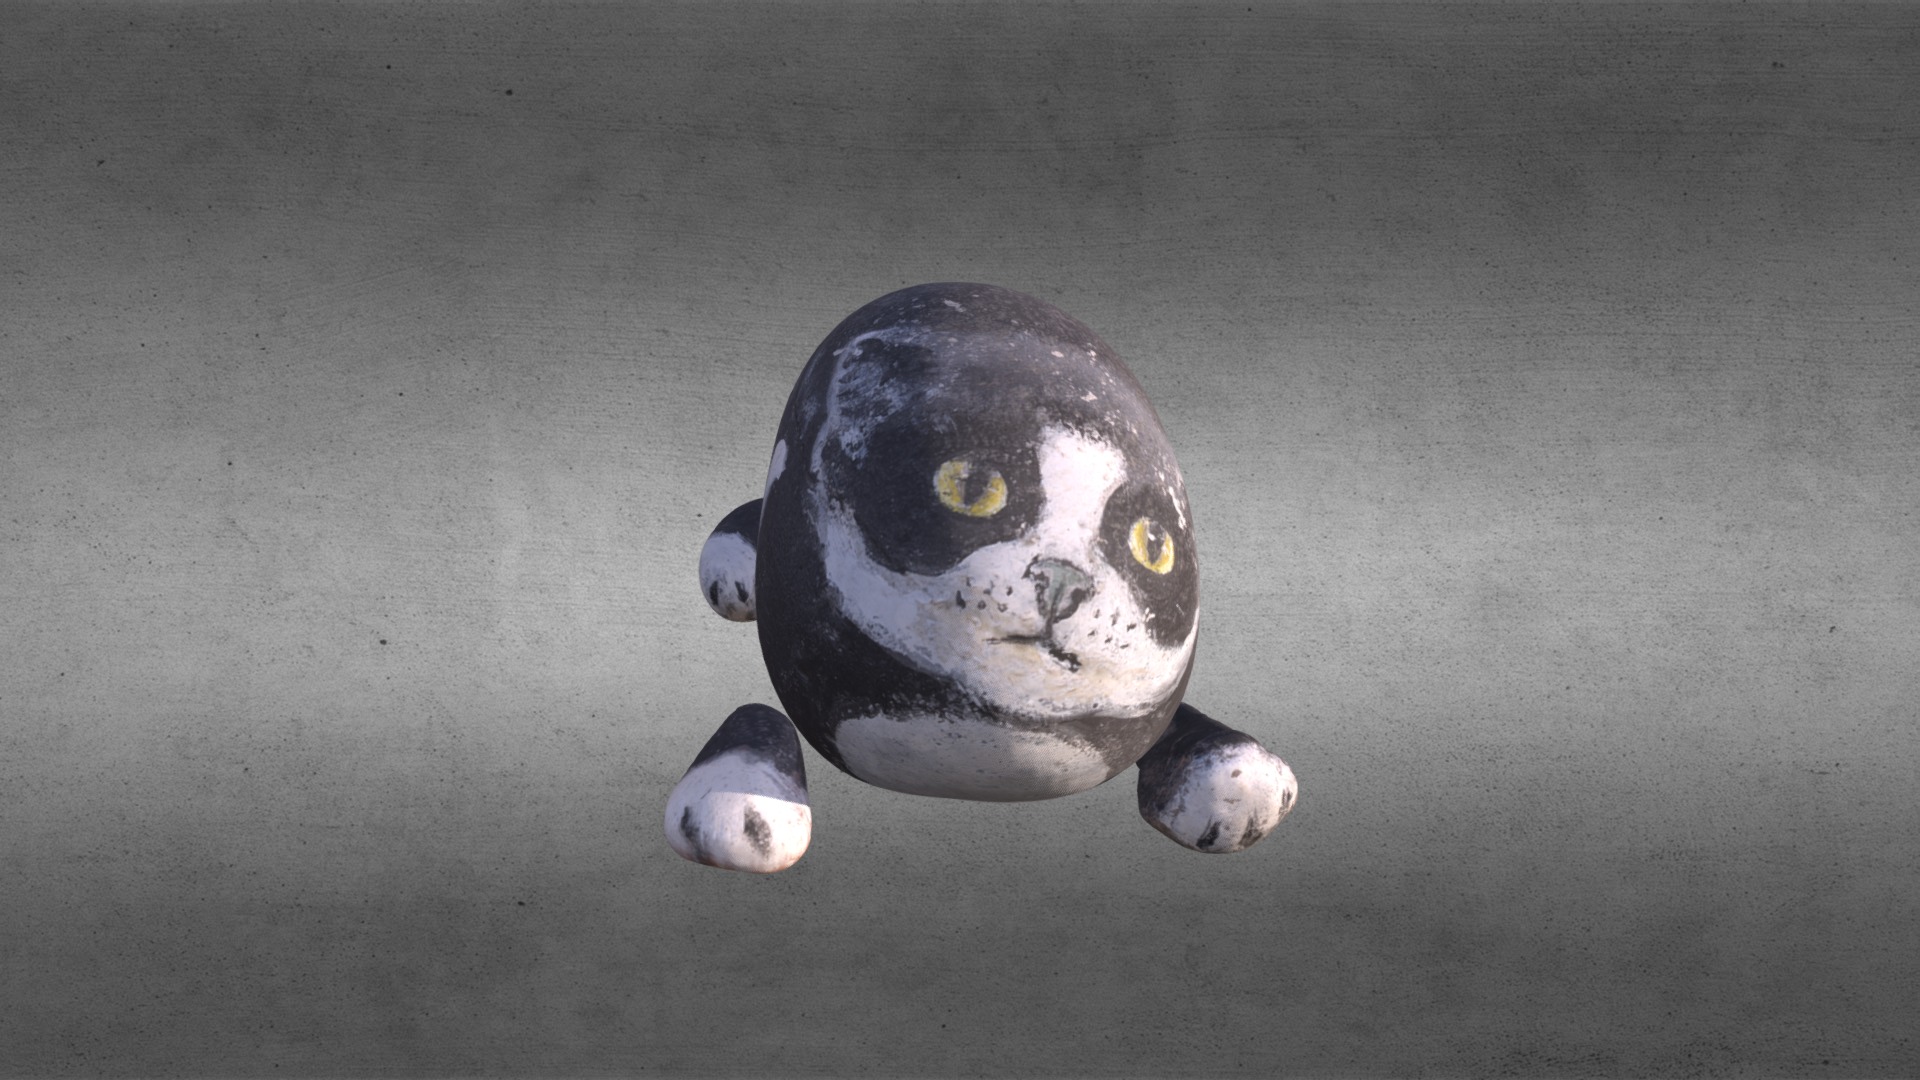 3D model Stone Painting Art – Cat2 - This is a 3D model of the Stone Painting Art - Cat2. The 3D model is about a turtle on a concrete surface.